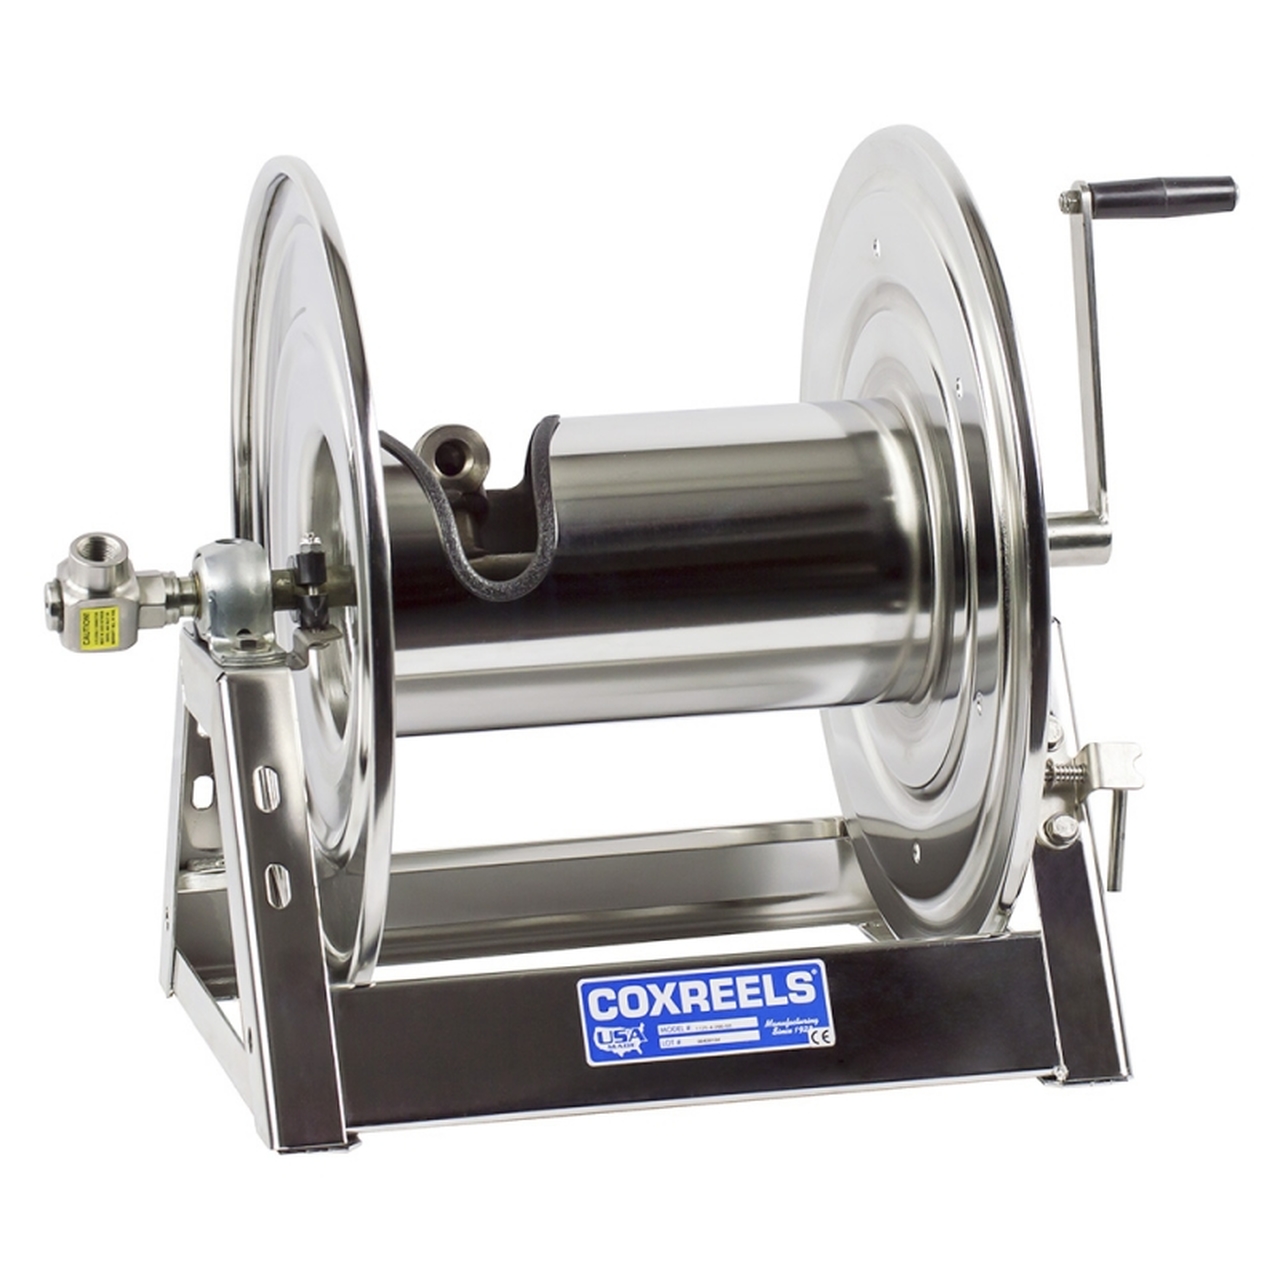 COXREELS® Stainless Steel Hand Crank Hose Reel (Type 304 Stainless Steel)